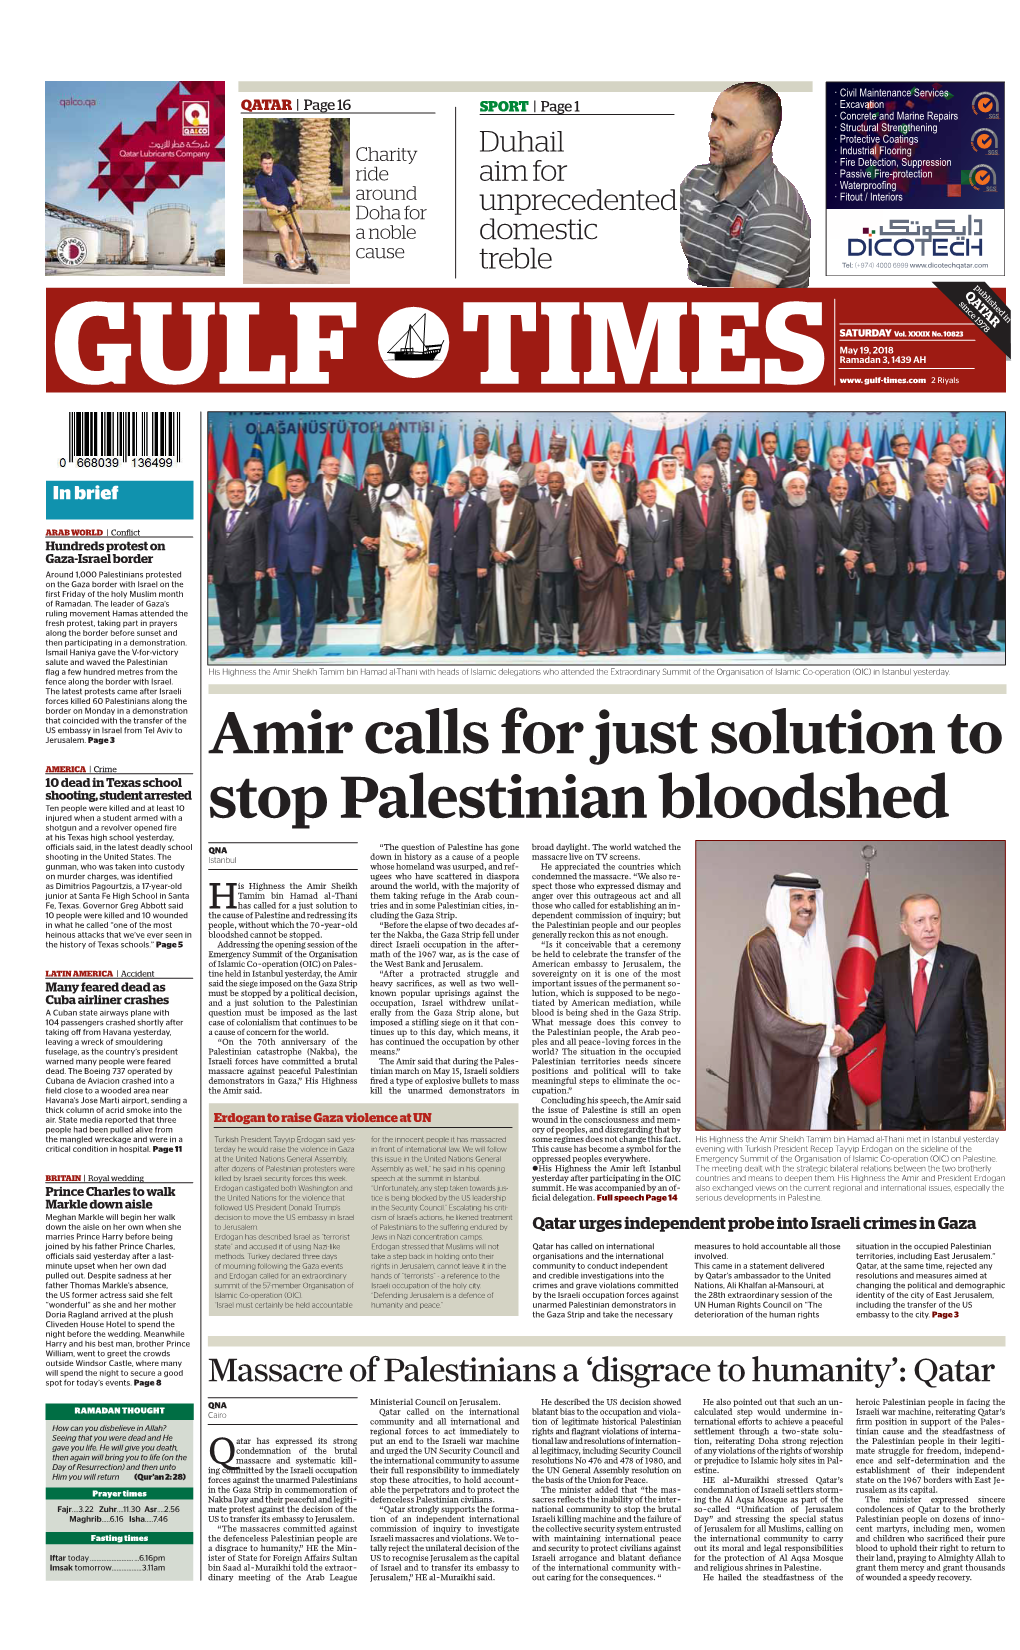 Amir Calls for Just Solution to Stop Palestinian Bloodshed